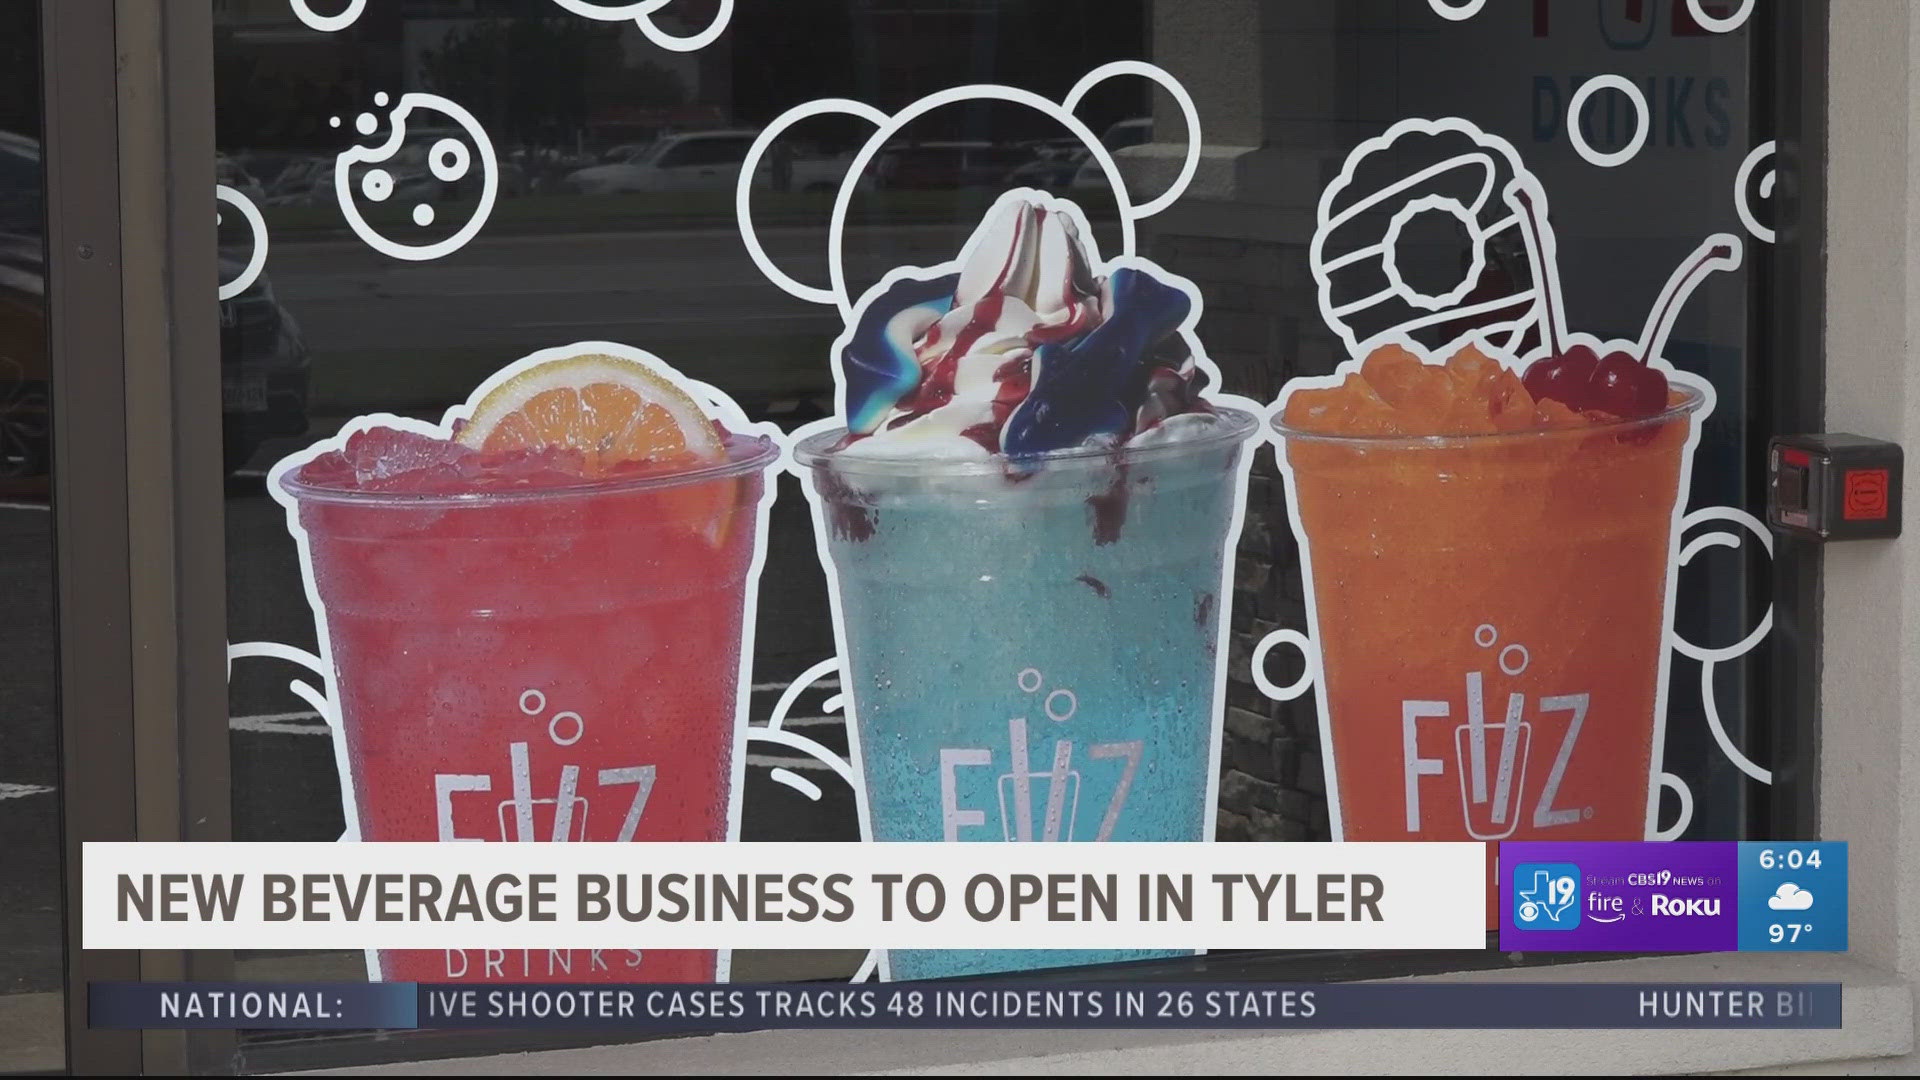 The store prides themselves on serving up custom sodas and sweet treats, as well as being veteran-owned and operated.